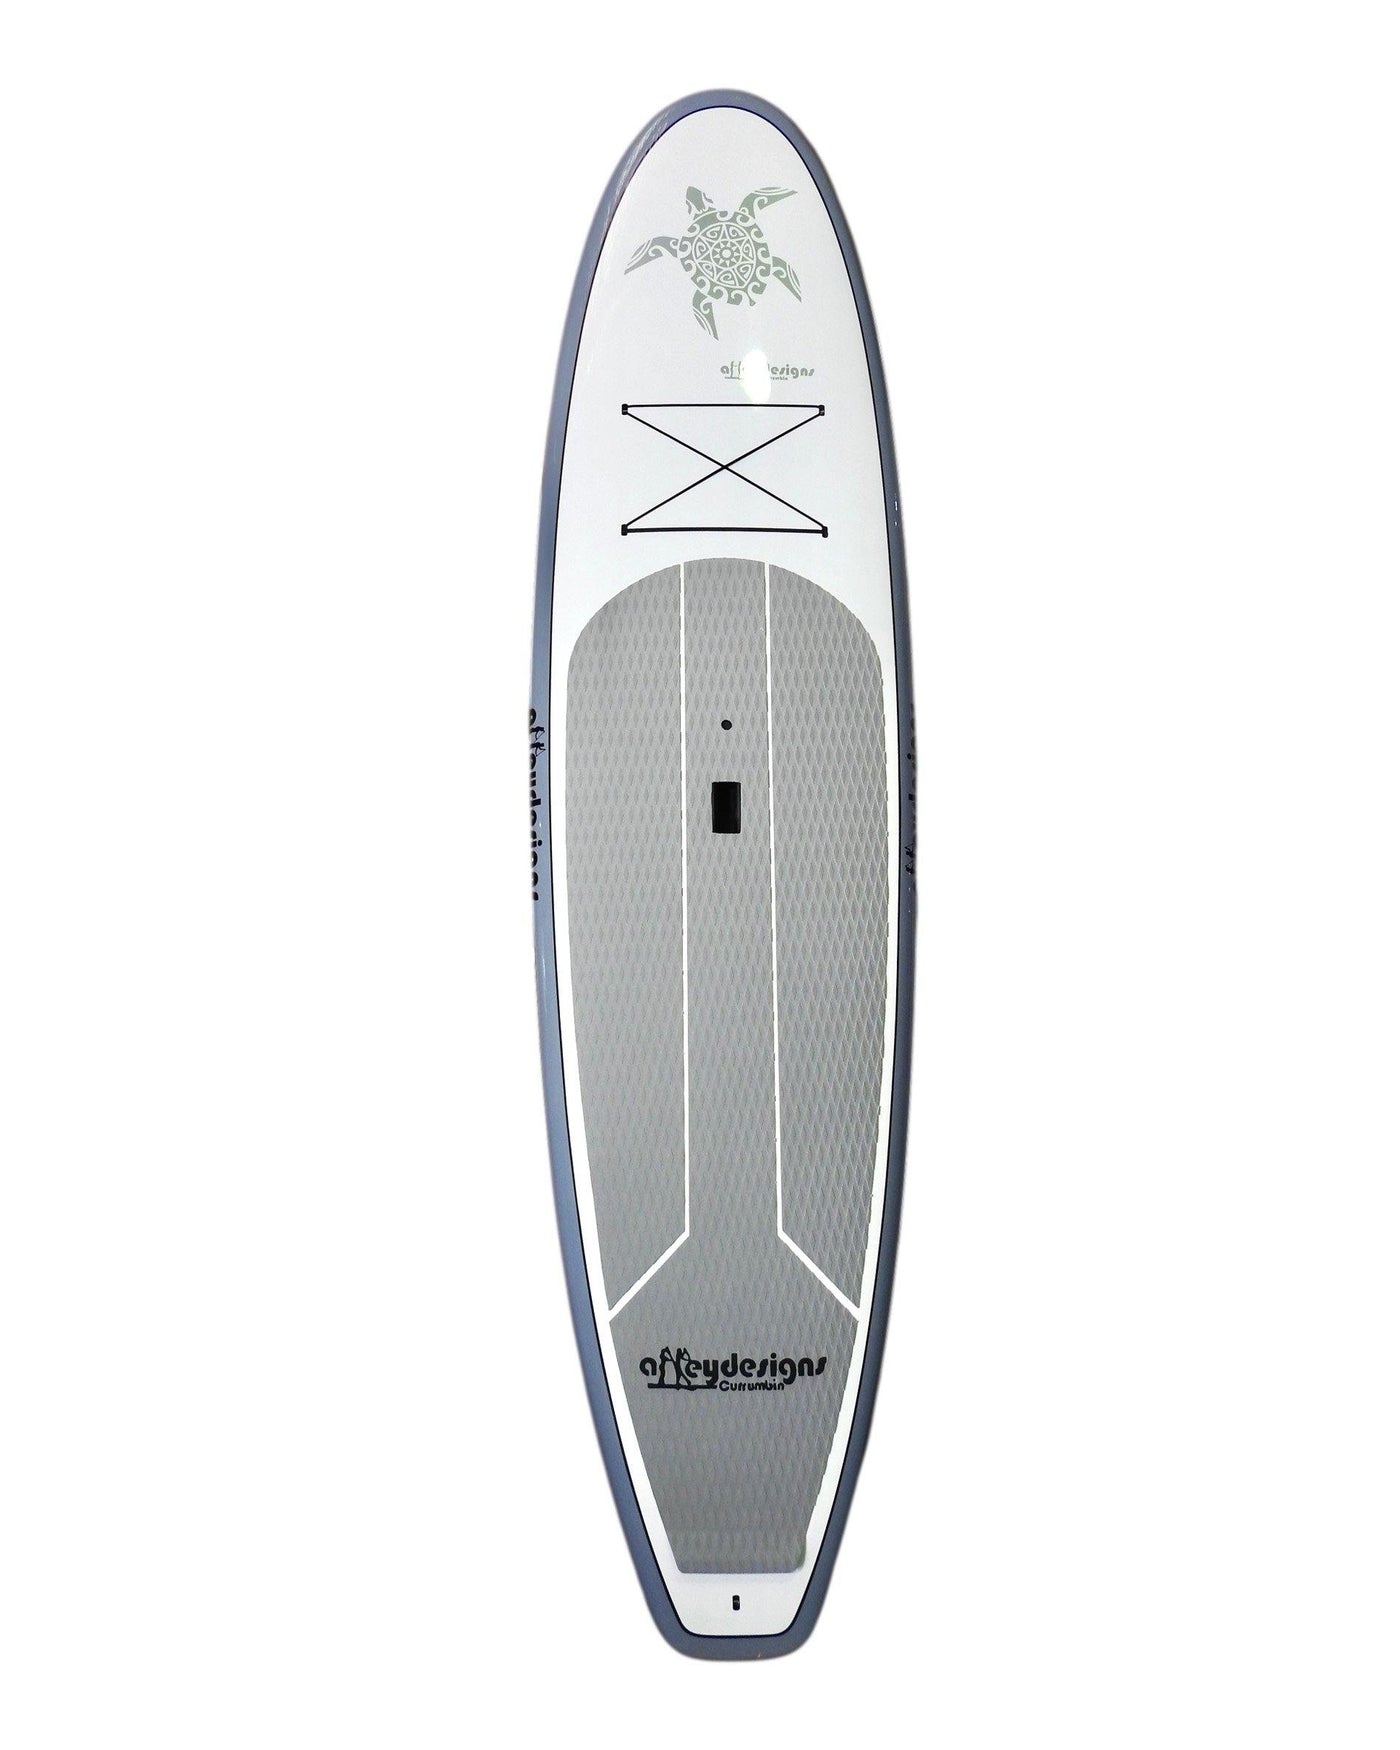 10’6” x 32” Thermo Mould Silver & White ,Turtle  SUP - Alleydesigns  Pty Ltd                                             ABN: 44165571264